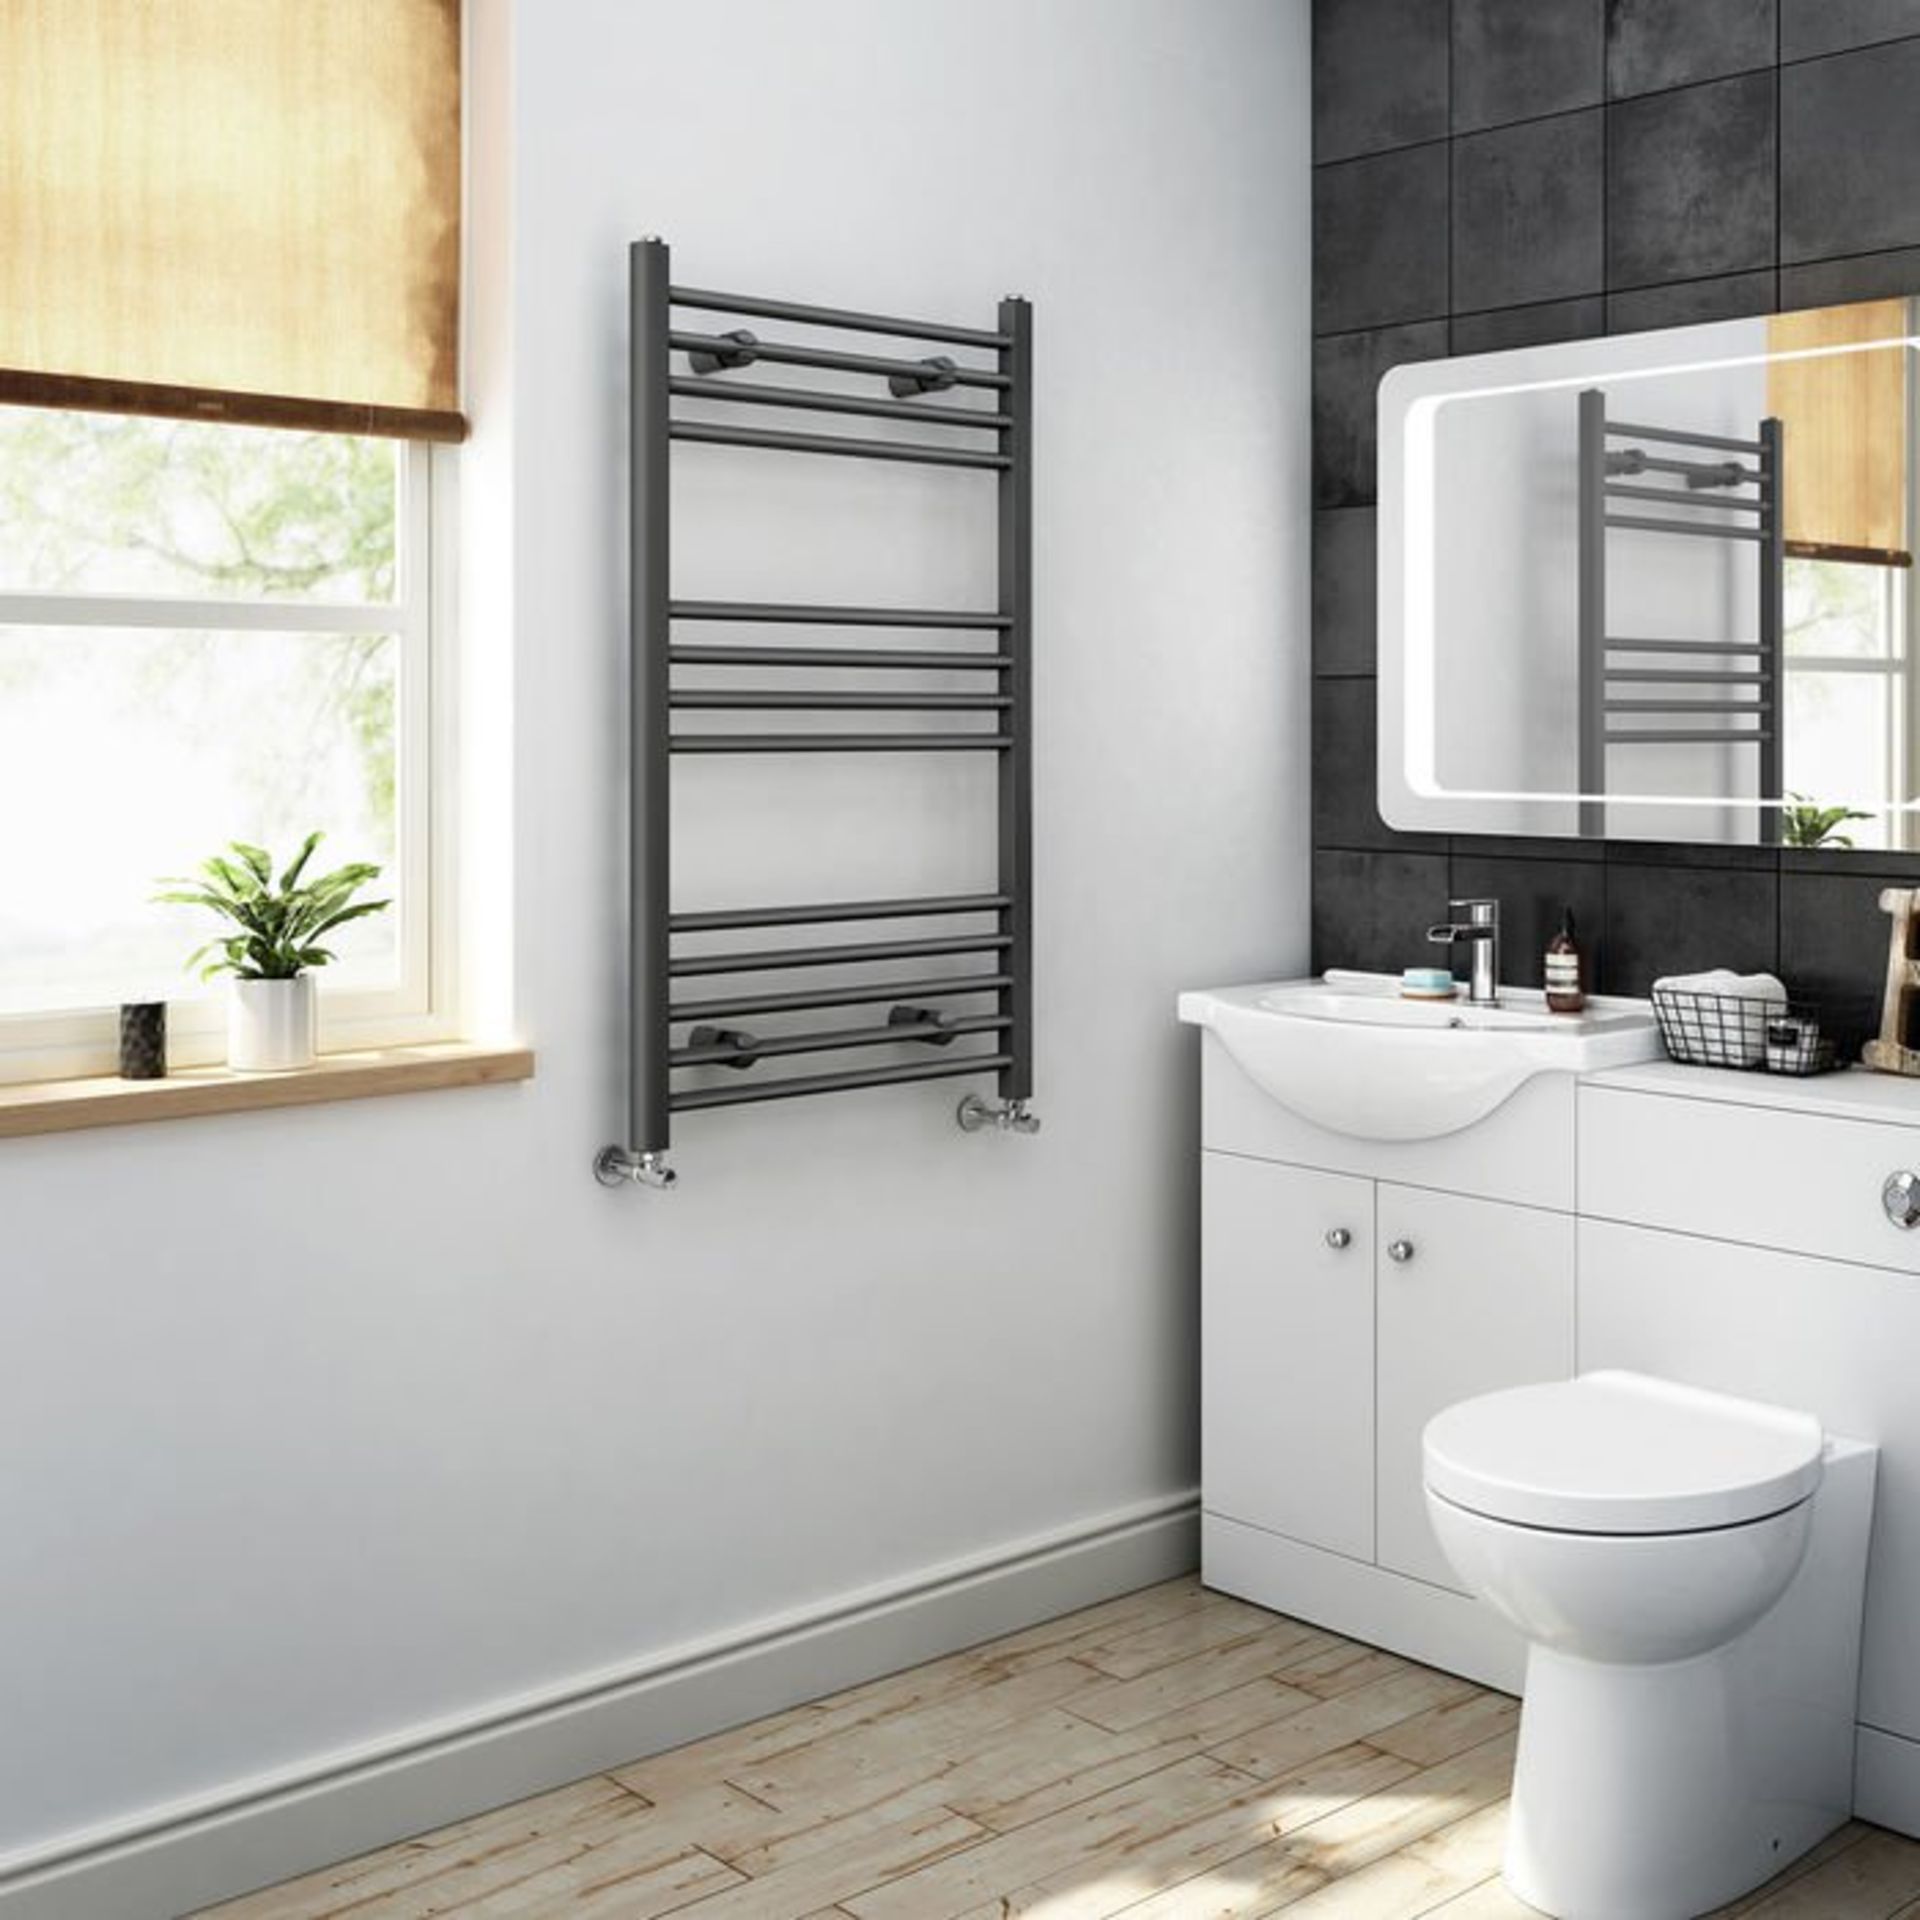 (V87) 1000x600mm - 20mm Tubes - Anthracite Heated Straight Rail Ladder Towel Radiator. Corrosion - Image 2 of 3